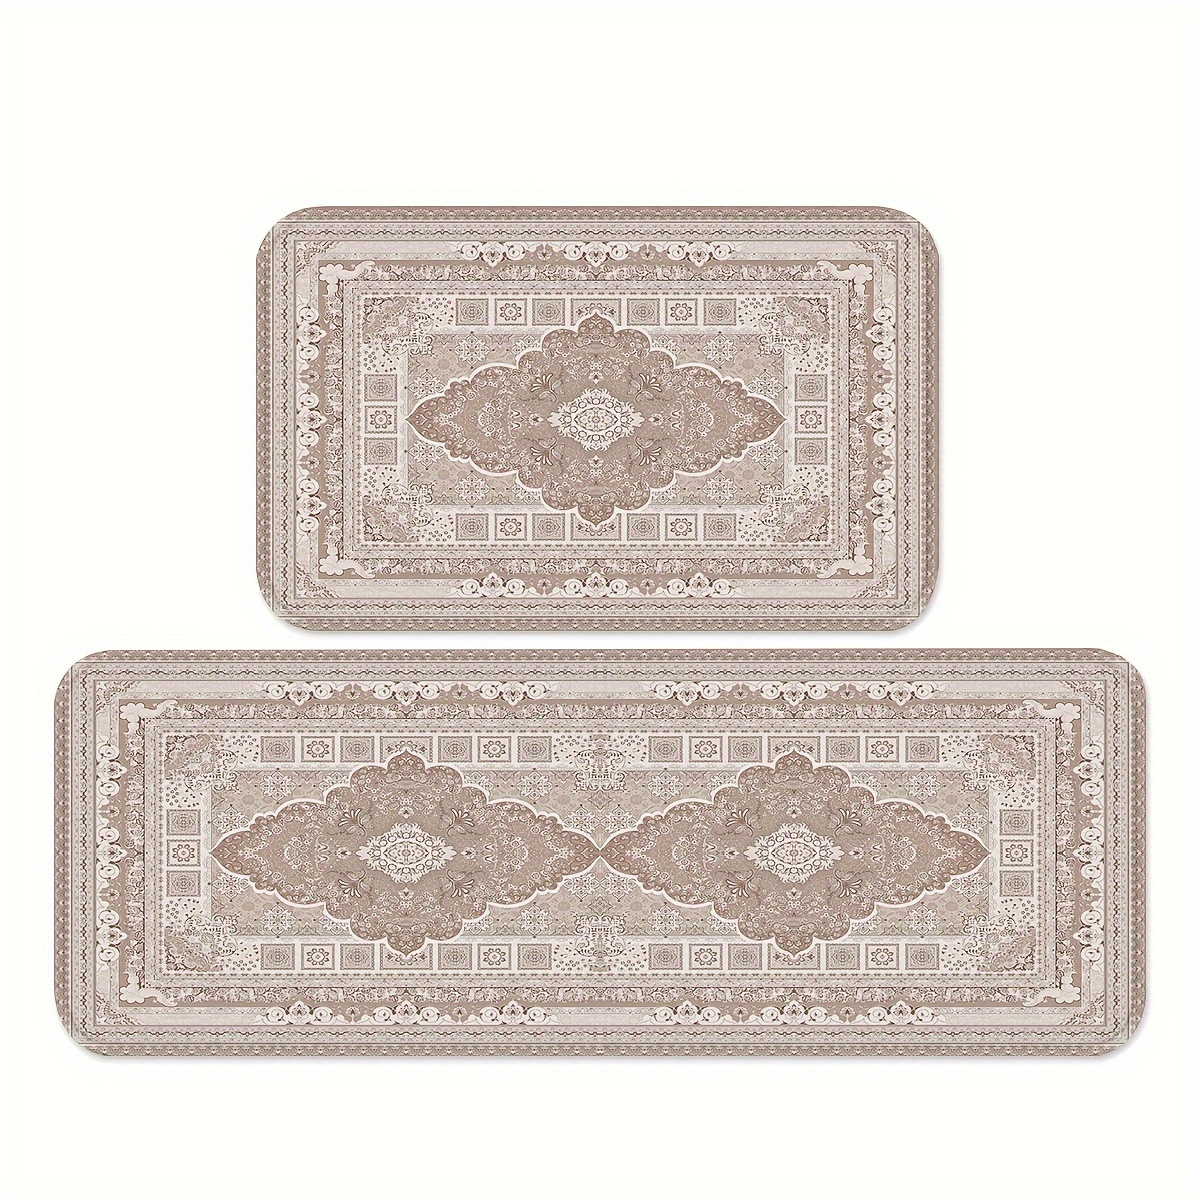 

1/2pcs Creative Plaid Design Kitchen Mats, Stain-resistant Throw Carpets, Rugs For Bathroom Spring Decor Farmhouse Home Office Sink Laundry Room Hotel High Traffic Area